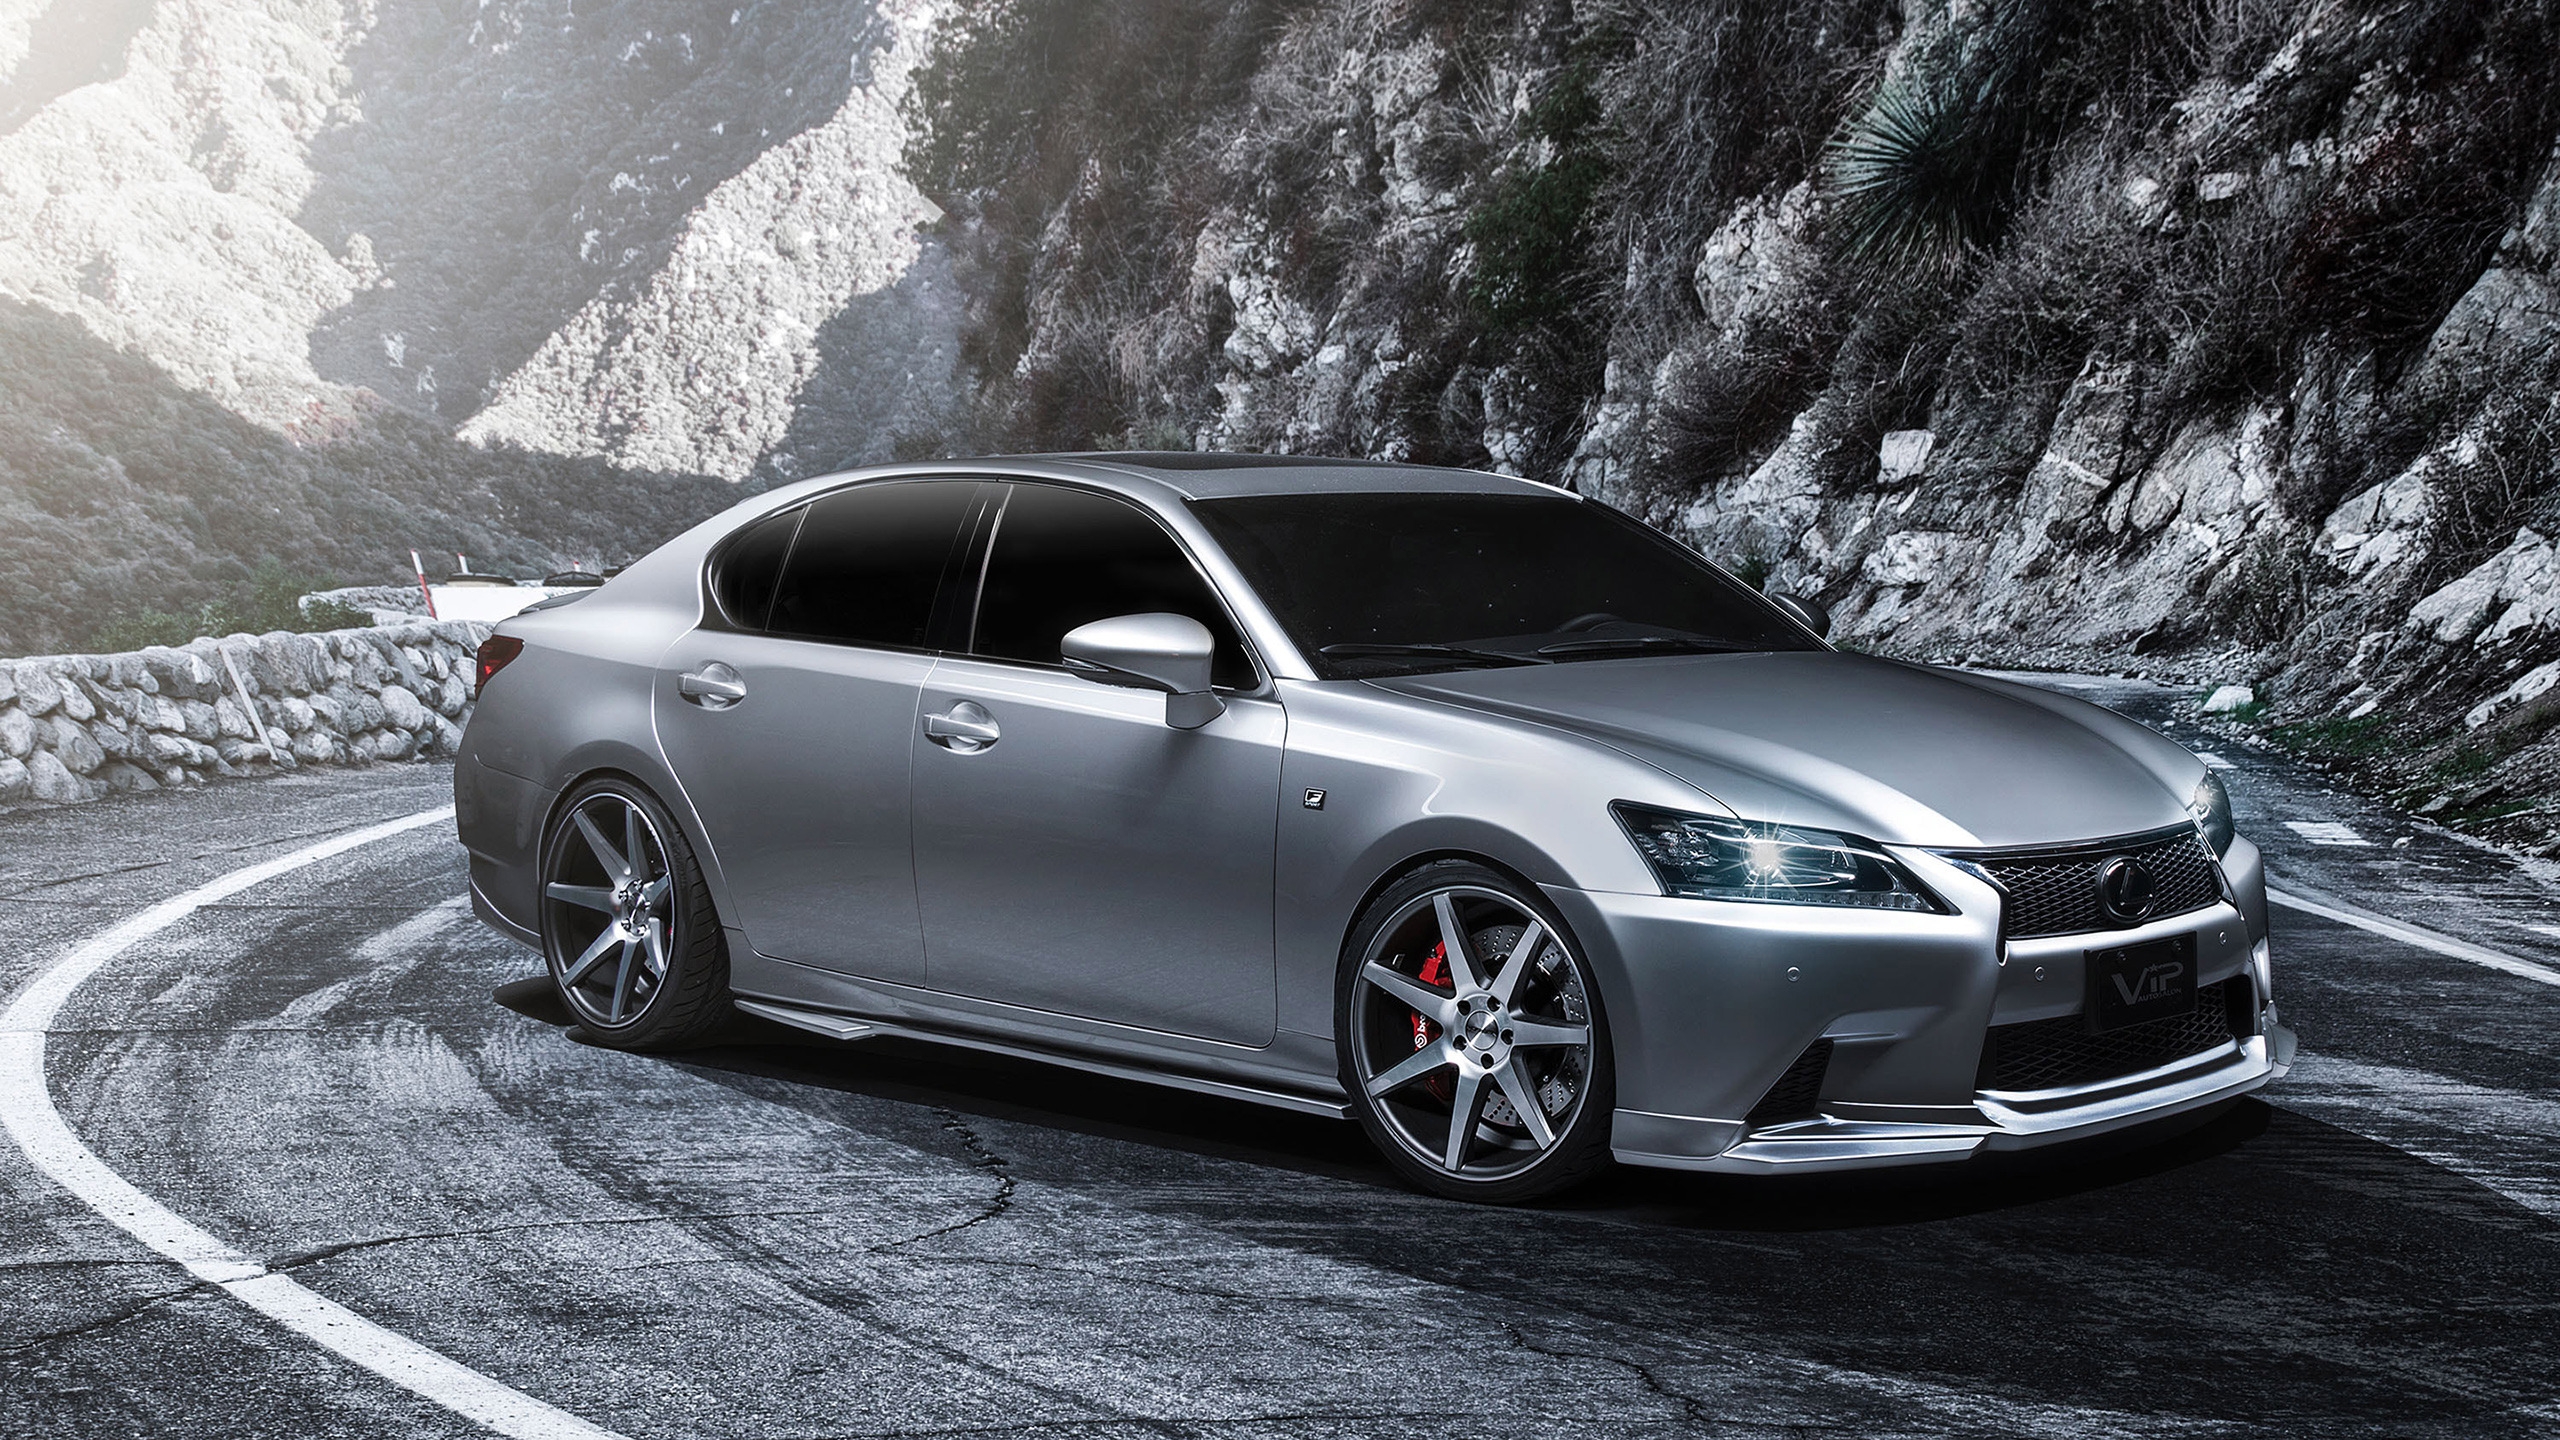 Supercharged 2013 Lexus GS 350 for 2560x1440 HDTV resolution